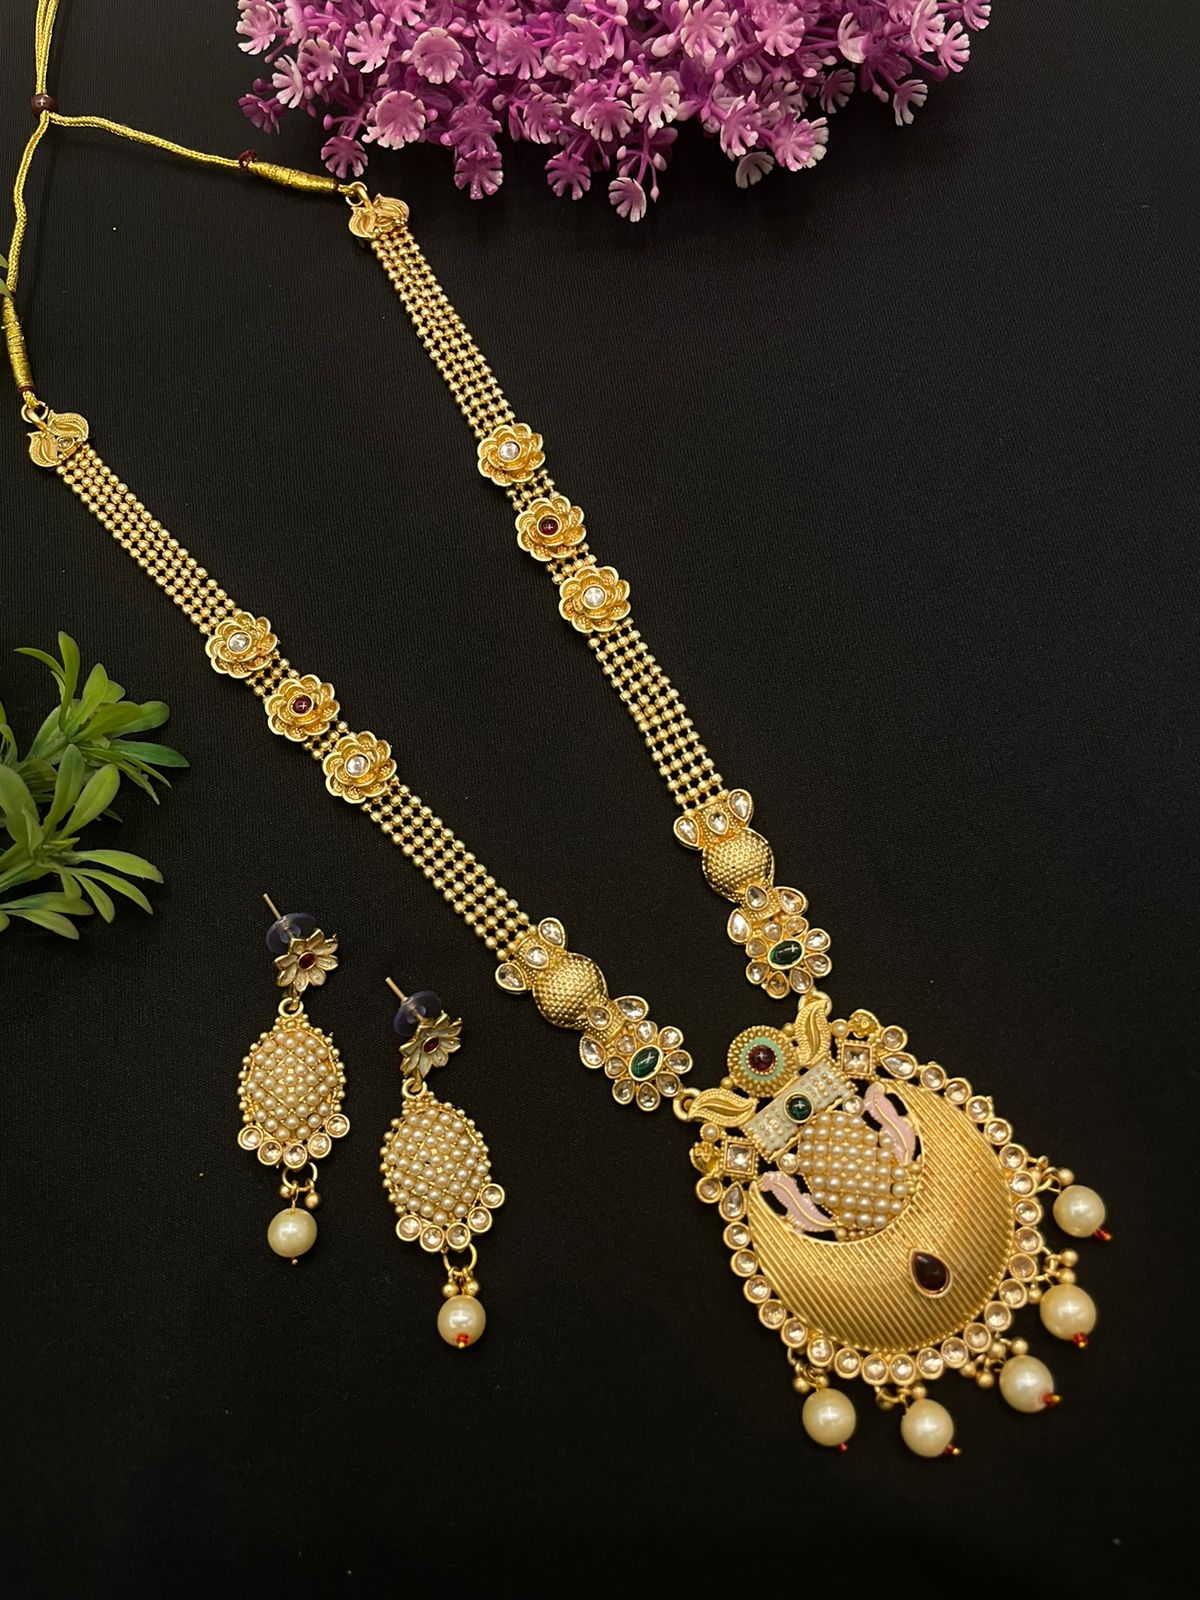 Upgrade your fashion game with our Antique Meenakari Jewelry Rajwadi Long Necklace Set